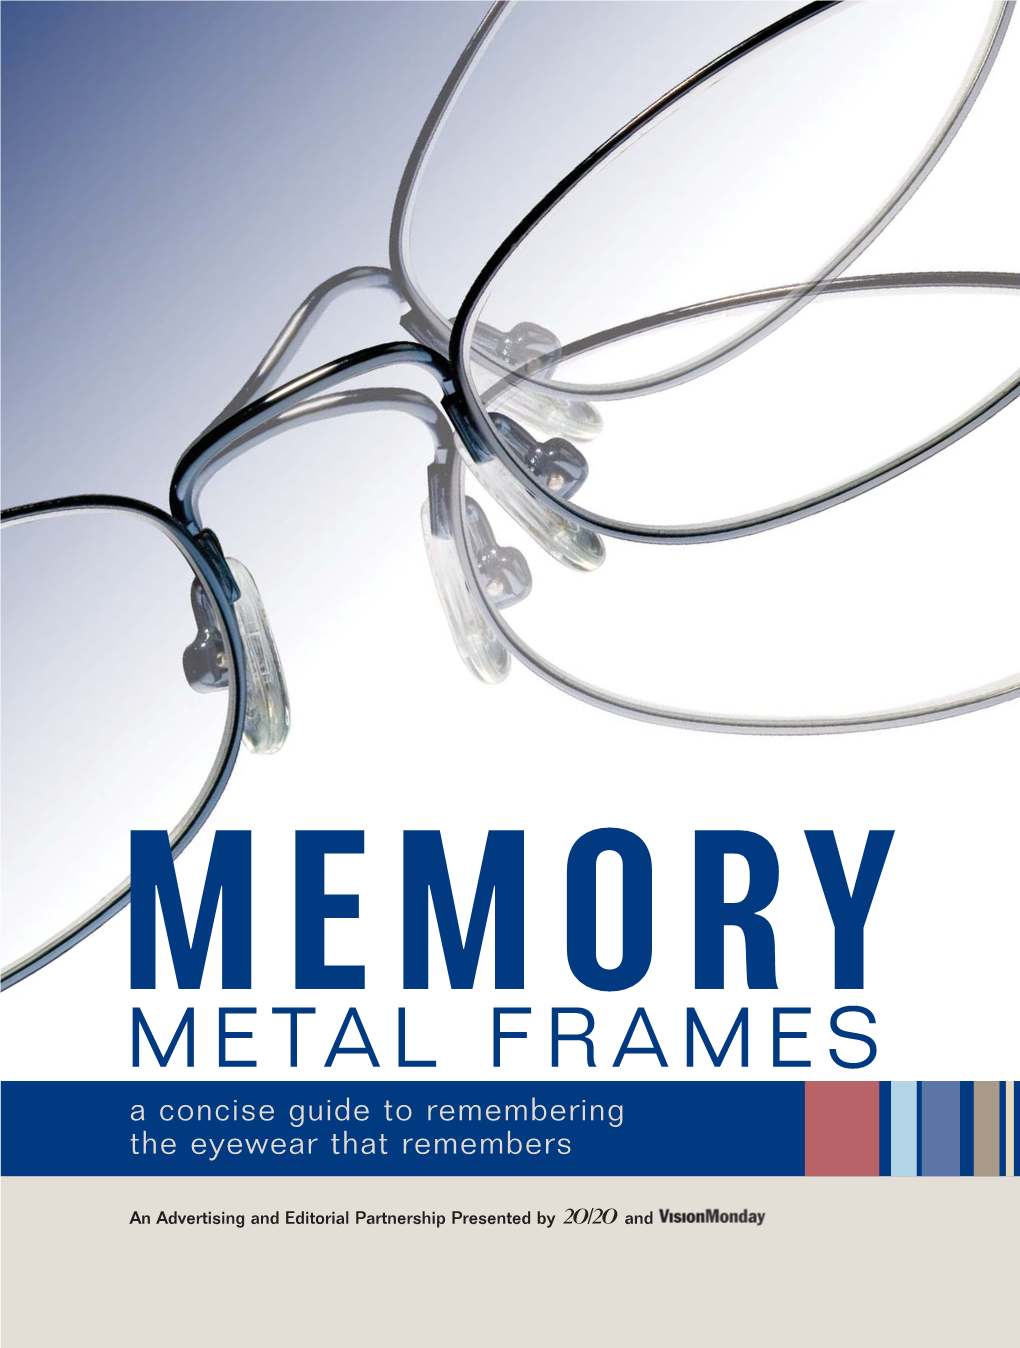 METAL FRAMES a Concise Guide to Remembering the Eyewear That Remembers